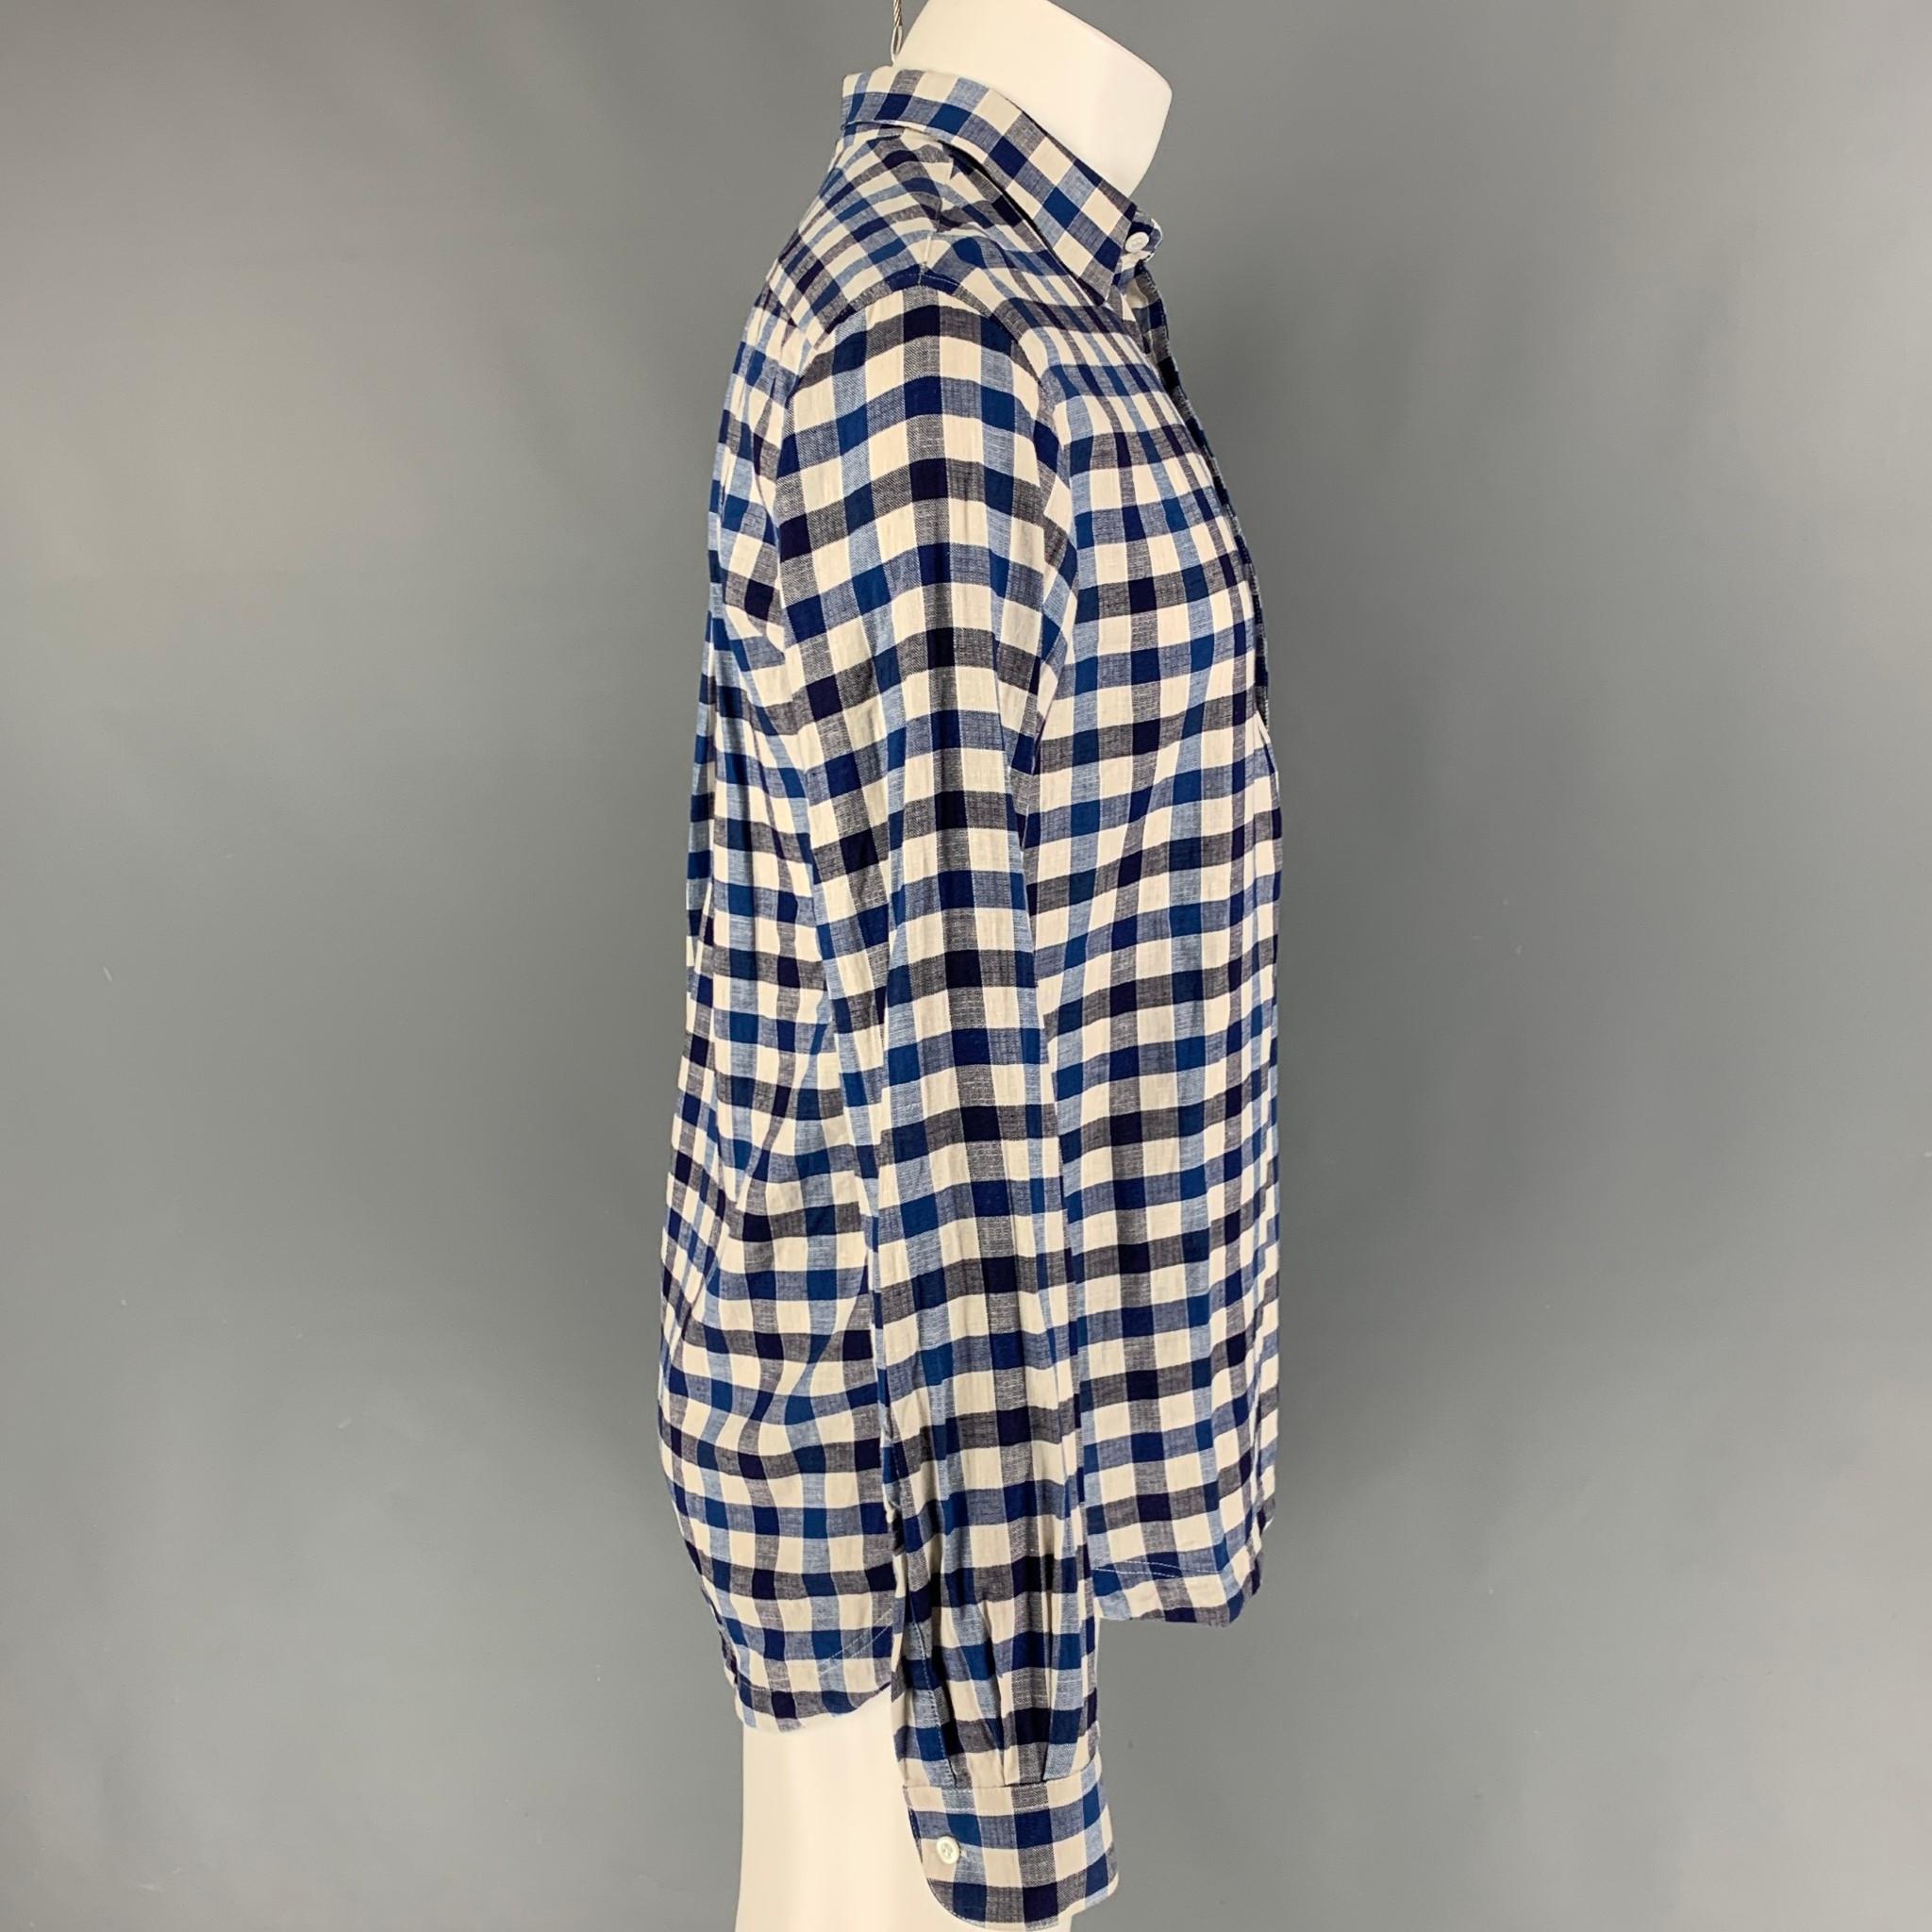 BARENA long sleeve shirt comes in a blue & white checkered material featuring a spread collar and a half buttoned closure. 

Very Good Pre-Owned Condition.
Marked: 46

Measurements:

Shoulder: 18 in.
Chest: 38 in.
Sleeve: 26 in.
Length: 30 in. 